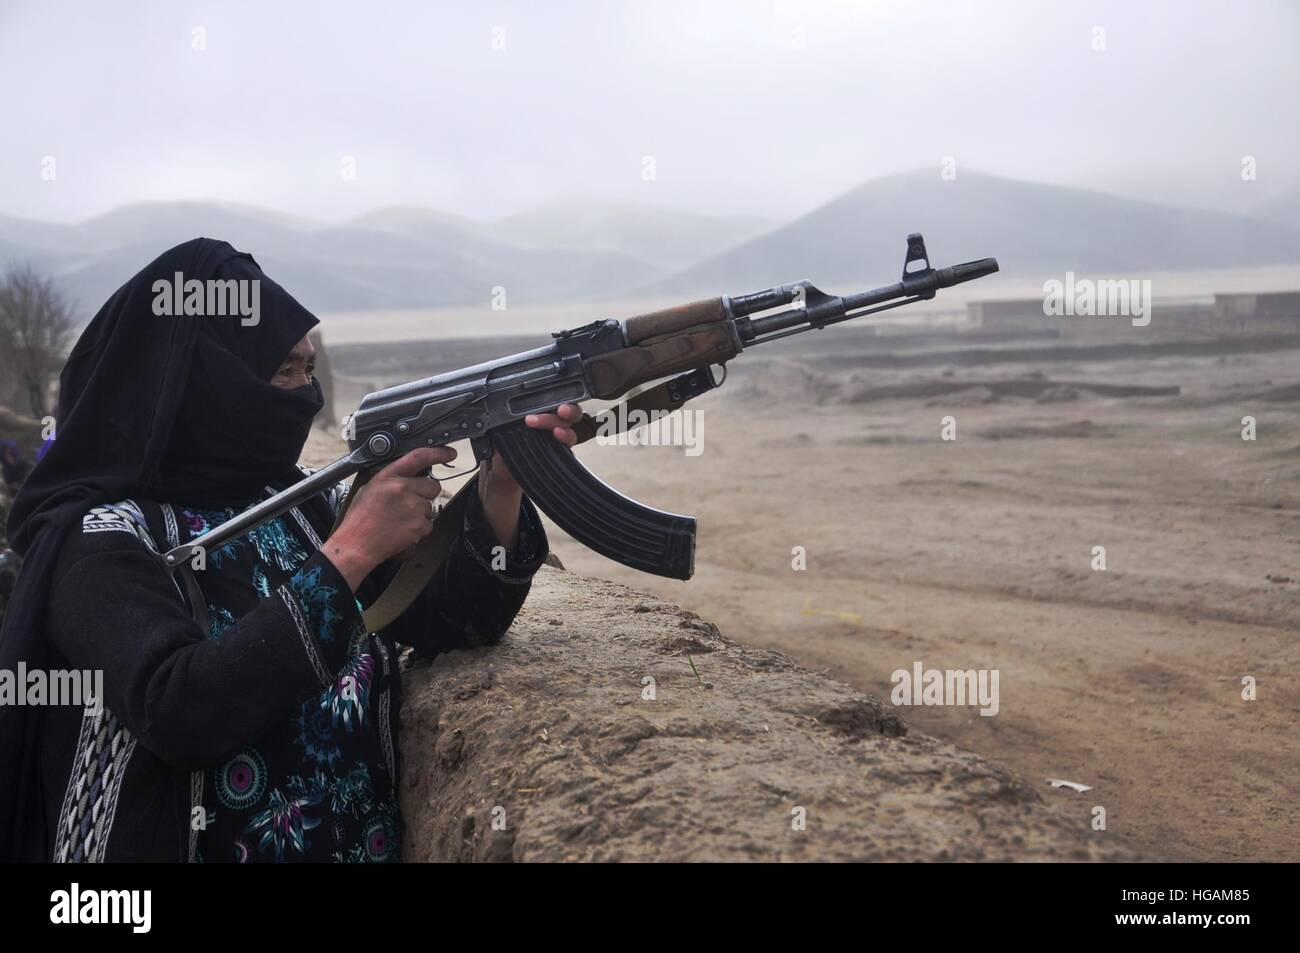 Shiberghan, Afghanistan. 5th Jan, 2017. A local woman poses with a gun in Qushtapa district of Jauzjan province, Afghanistan, Jan. 5, 2017. More than hundreds of women have taken arms against armed insurgents in the northern Jauzjan province. © Mohammad Jan Aria/Xinhua/Alamy Live News Stock Photo